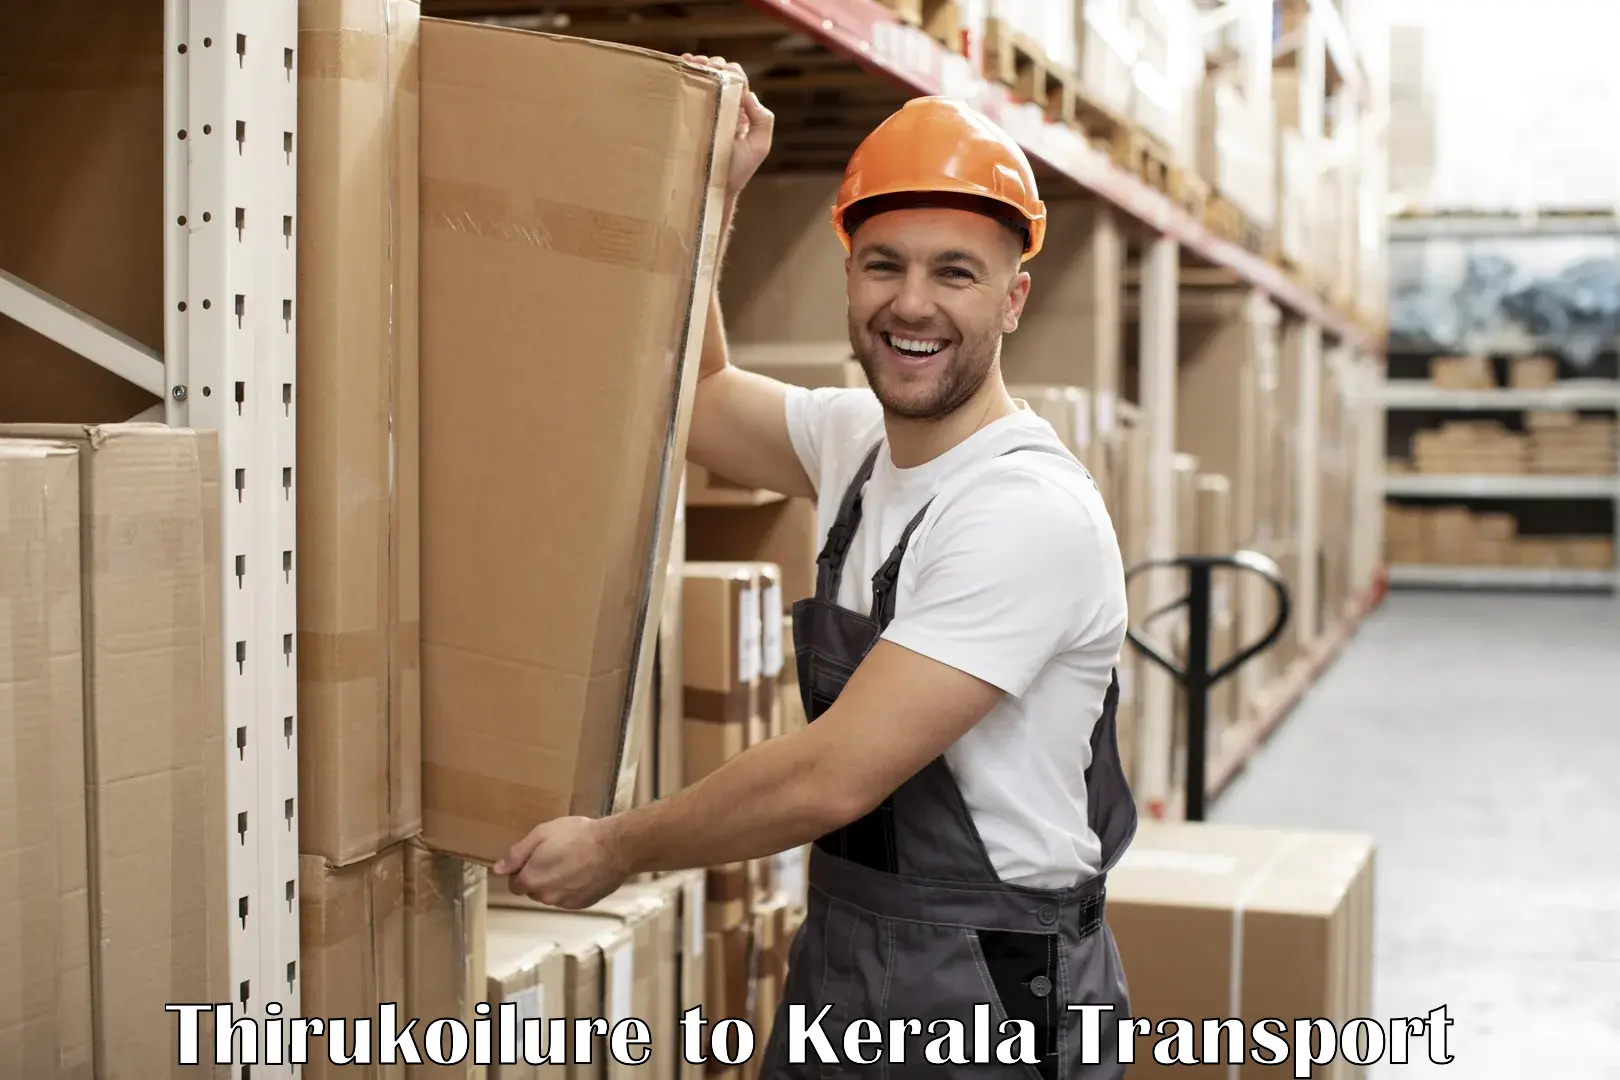 Express transport services Thirukoilure to Parappa